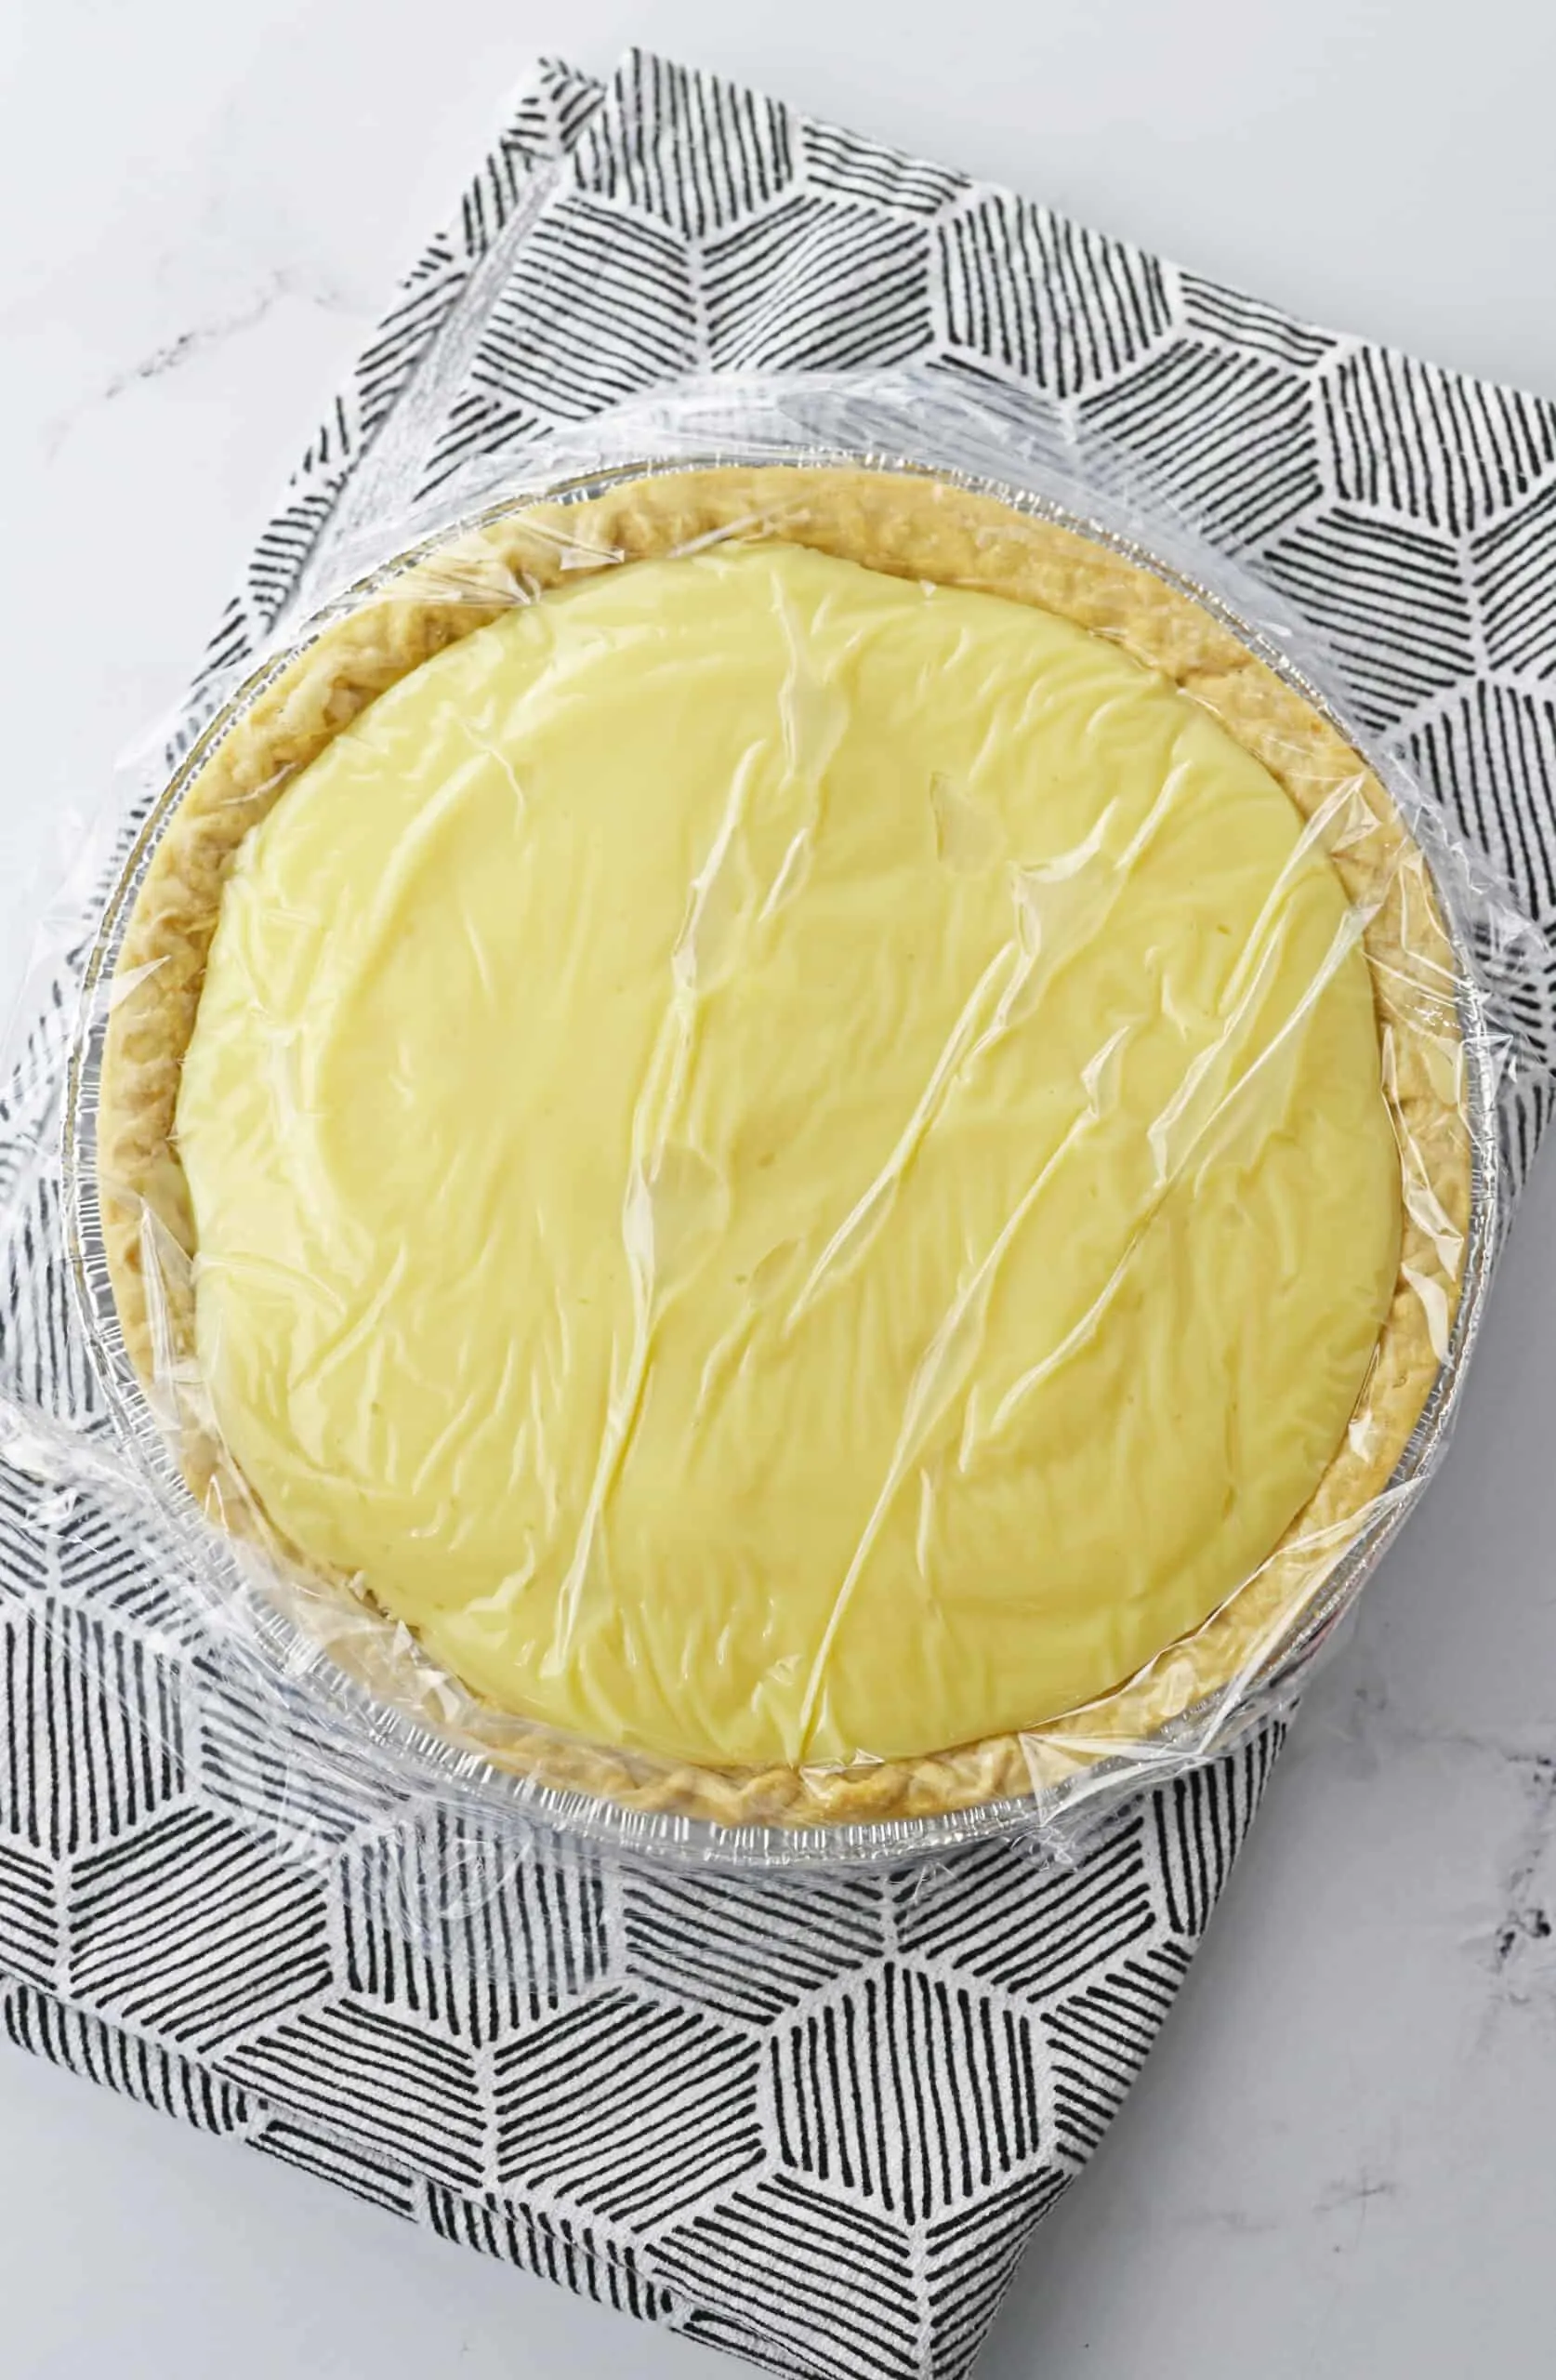 Banana Cream Pie wrapped place in refrigerator